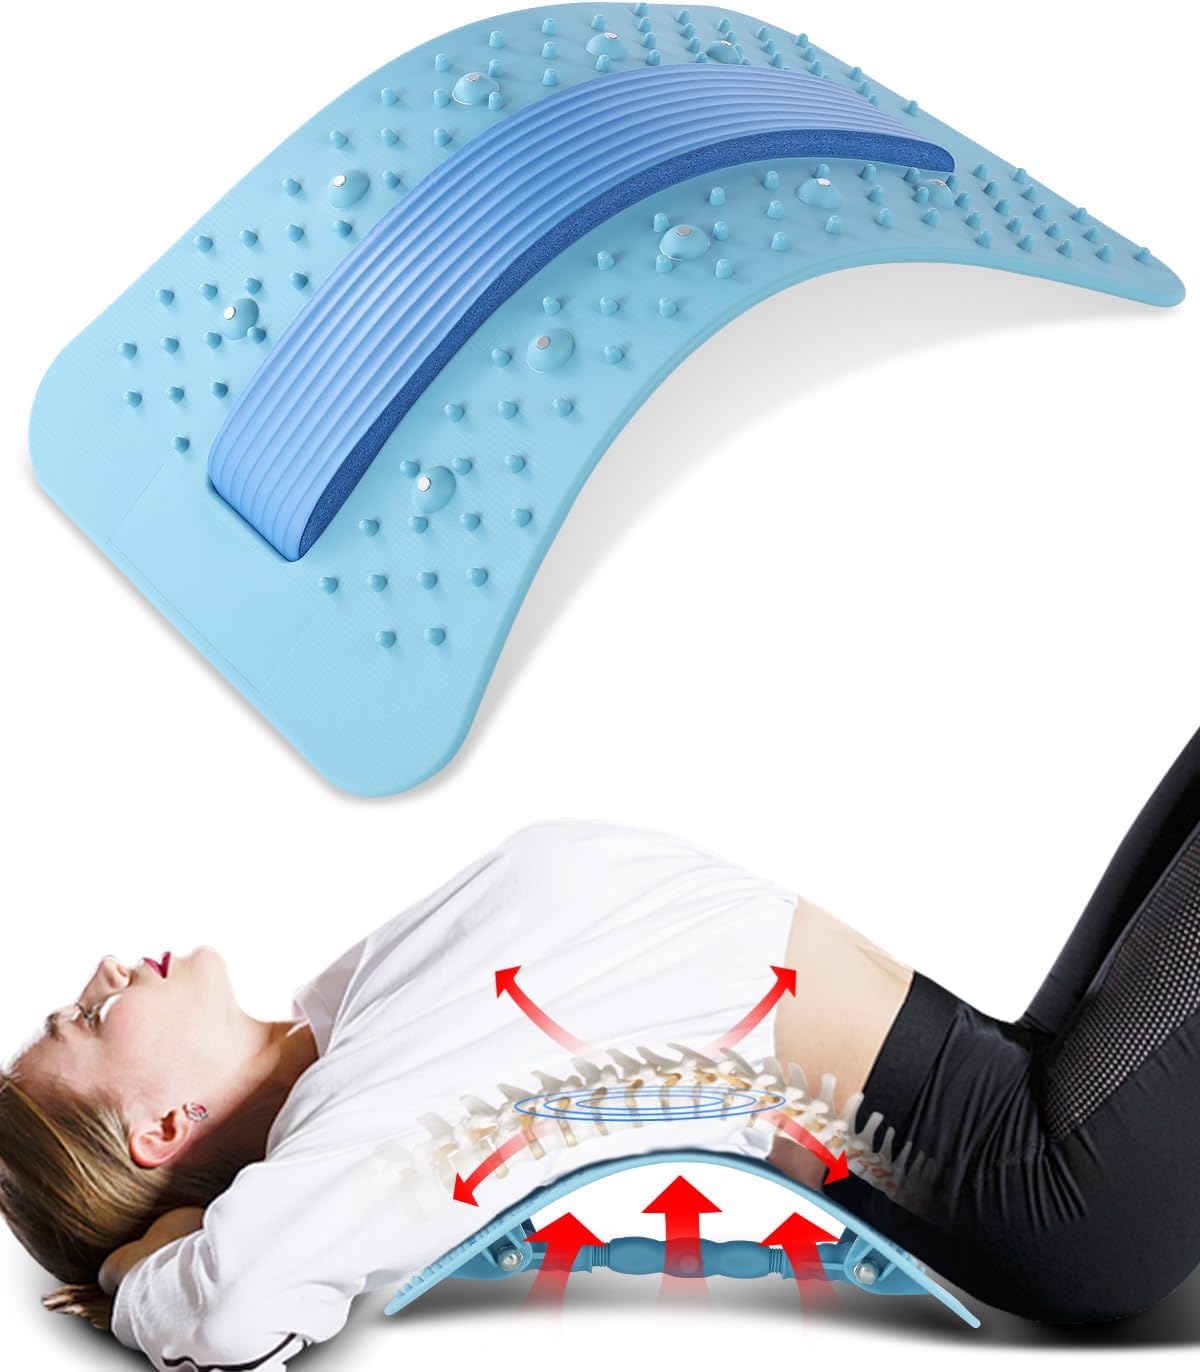 Back Stretcher for Pain Relief